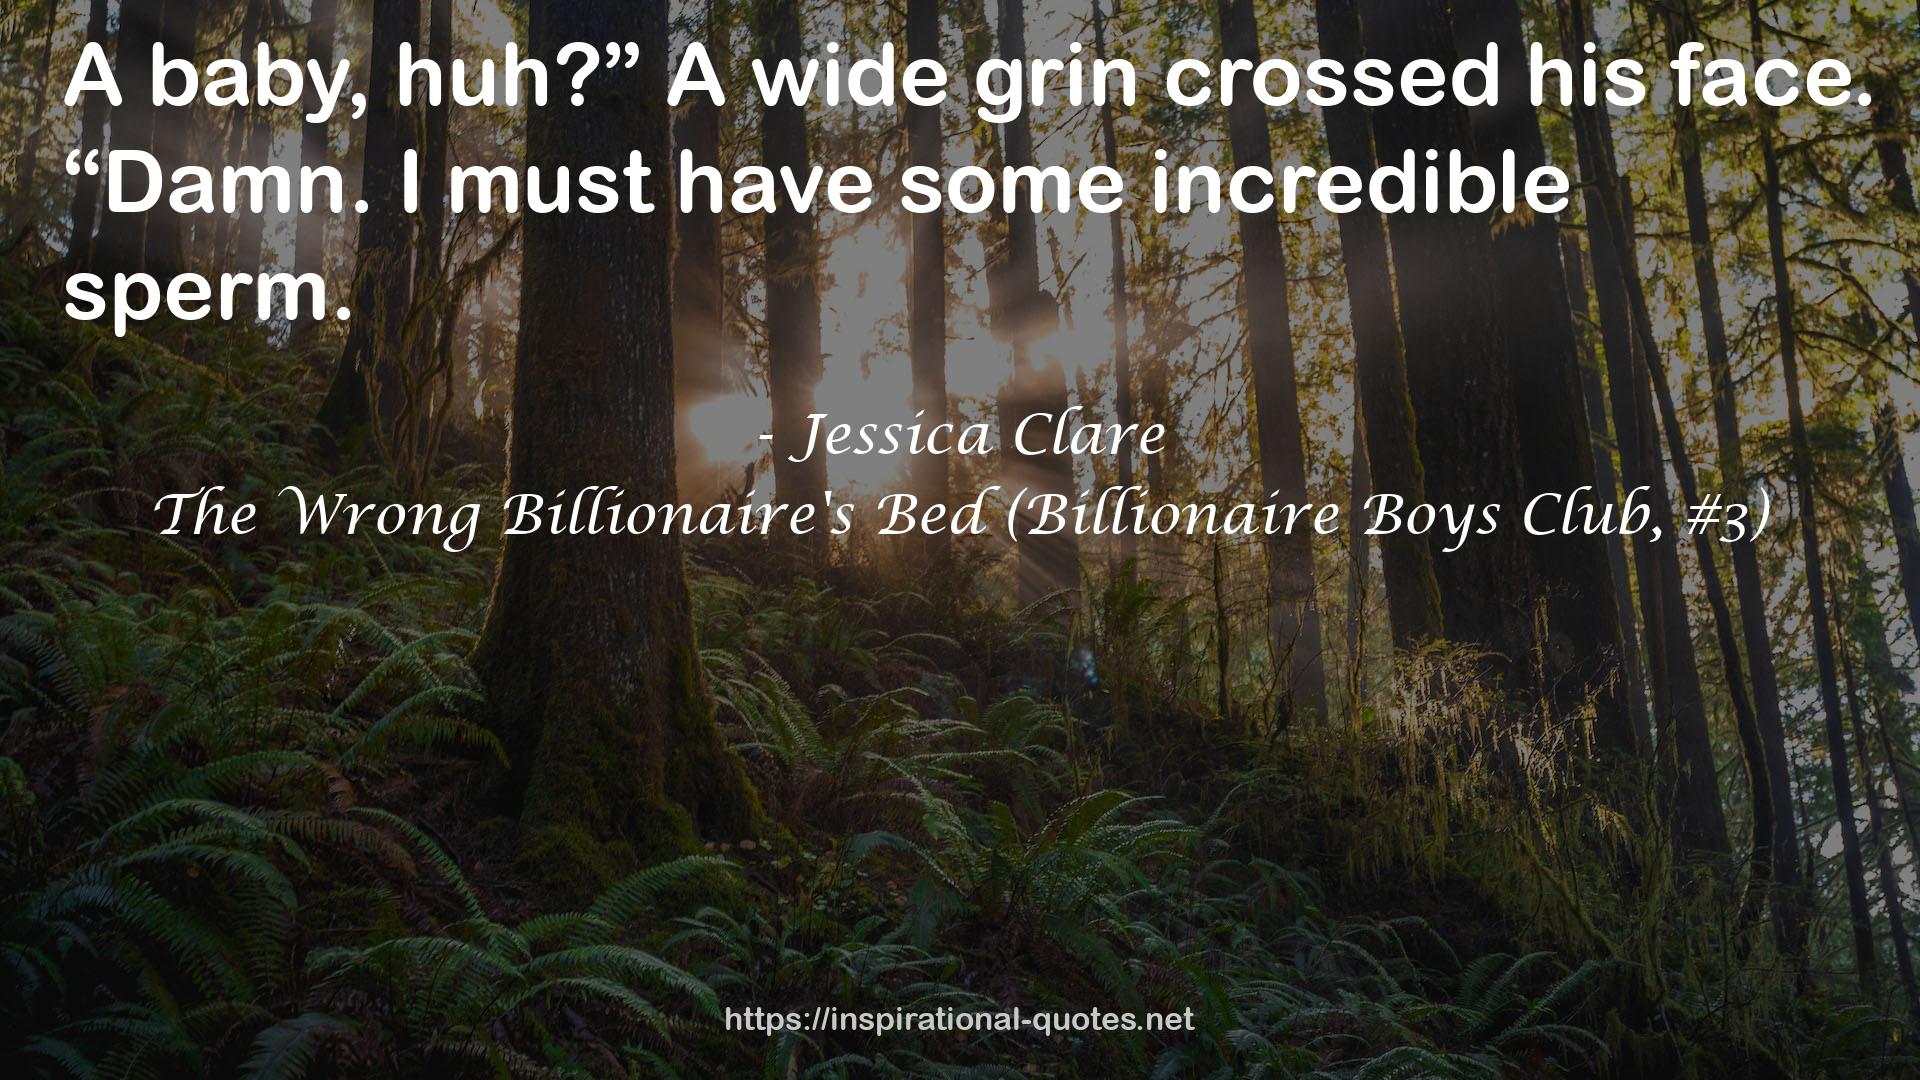 The Wrong Billionaire's Bed (Billionaire Boys Club, #3) QUOTES